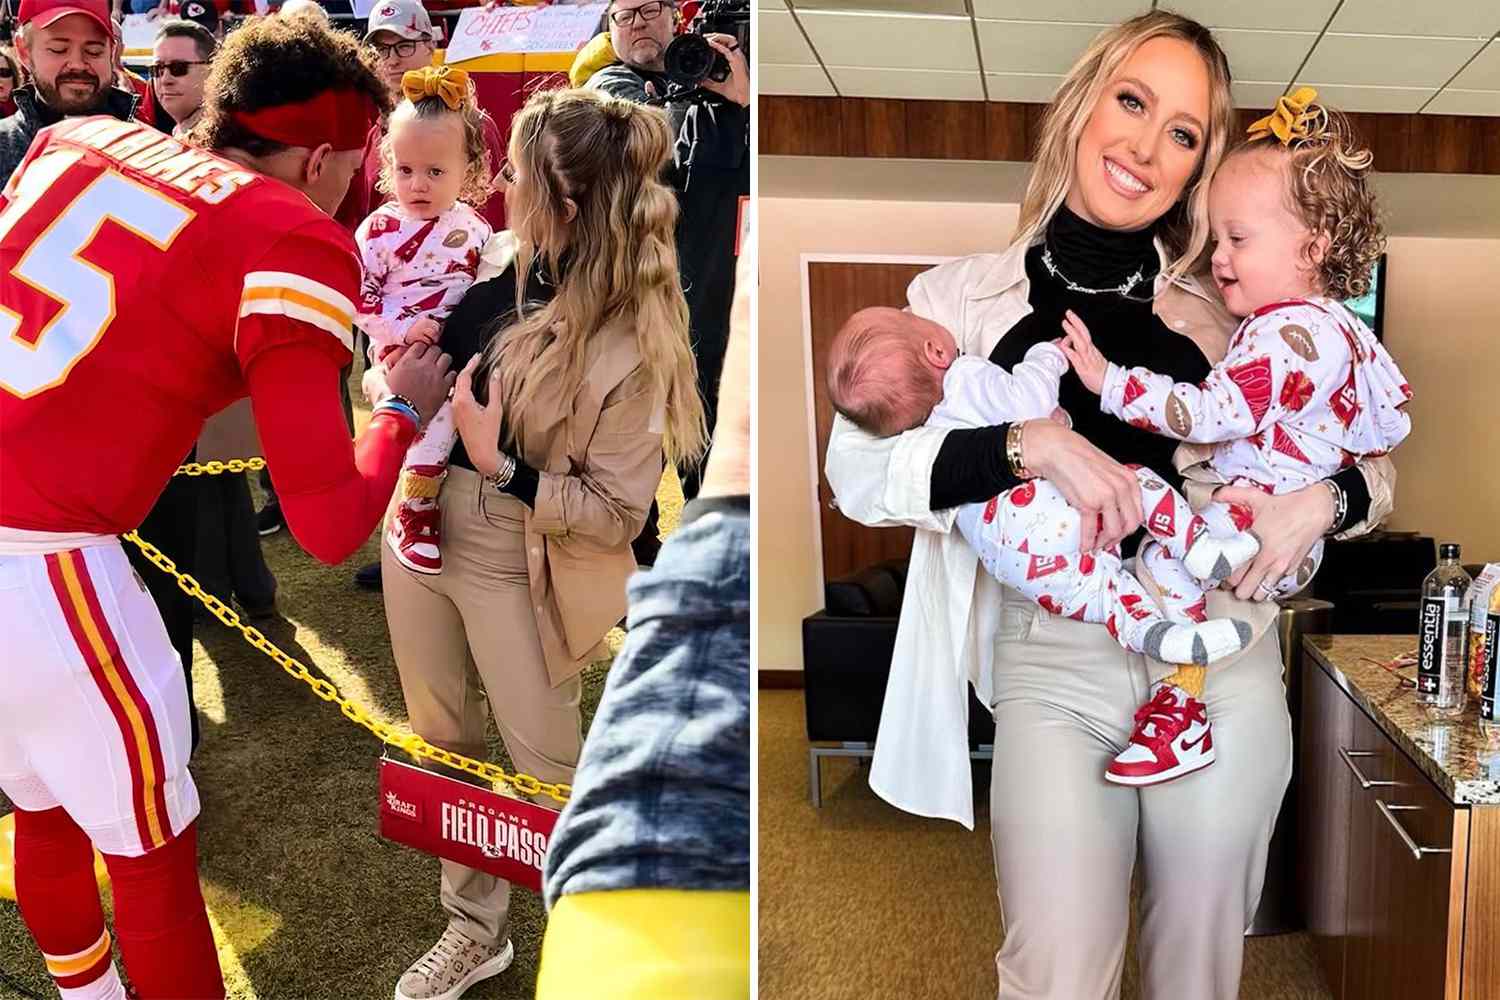 Brittany Mahomes makes peace with Sterling and Bronze after going on bachelorette party to Mexico